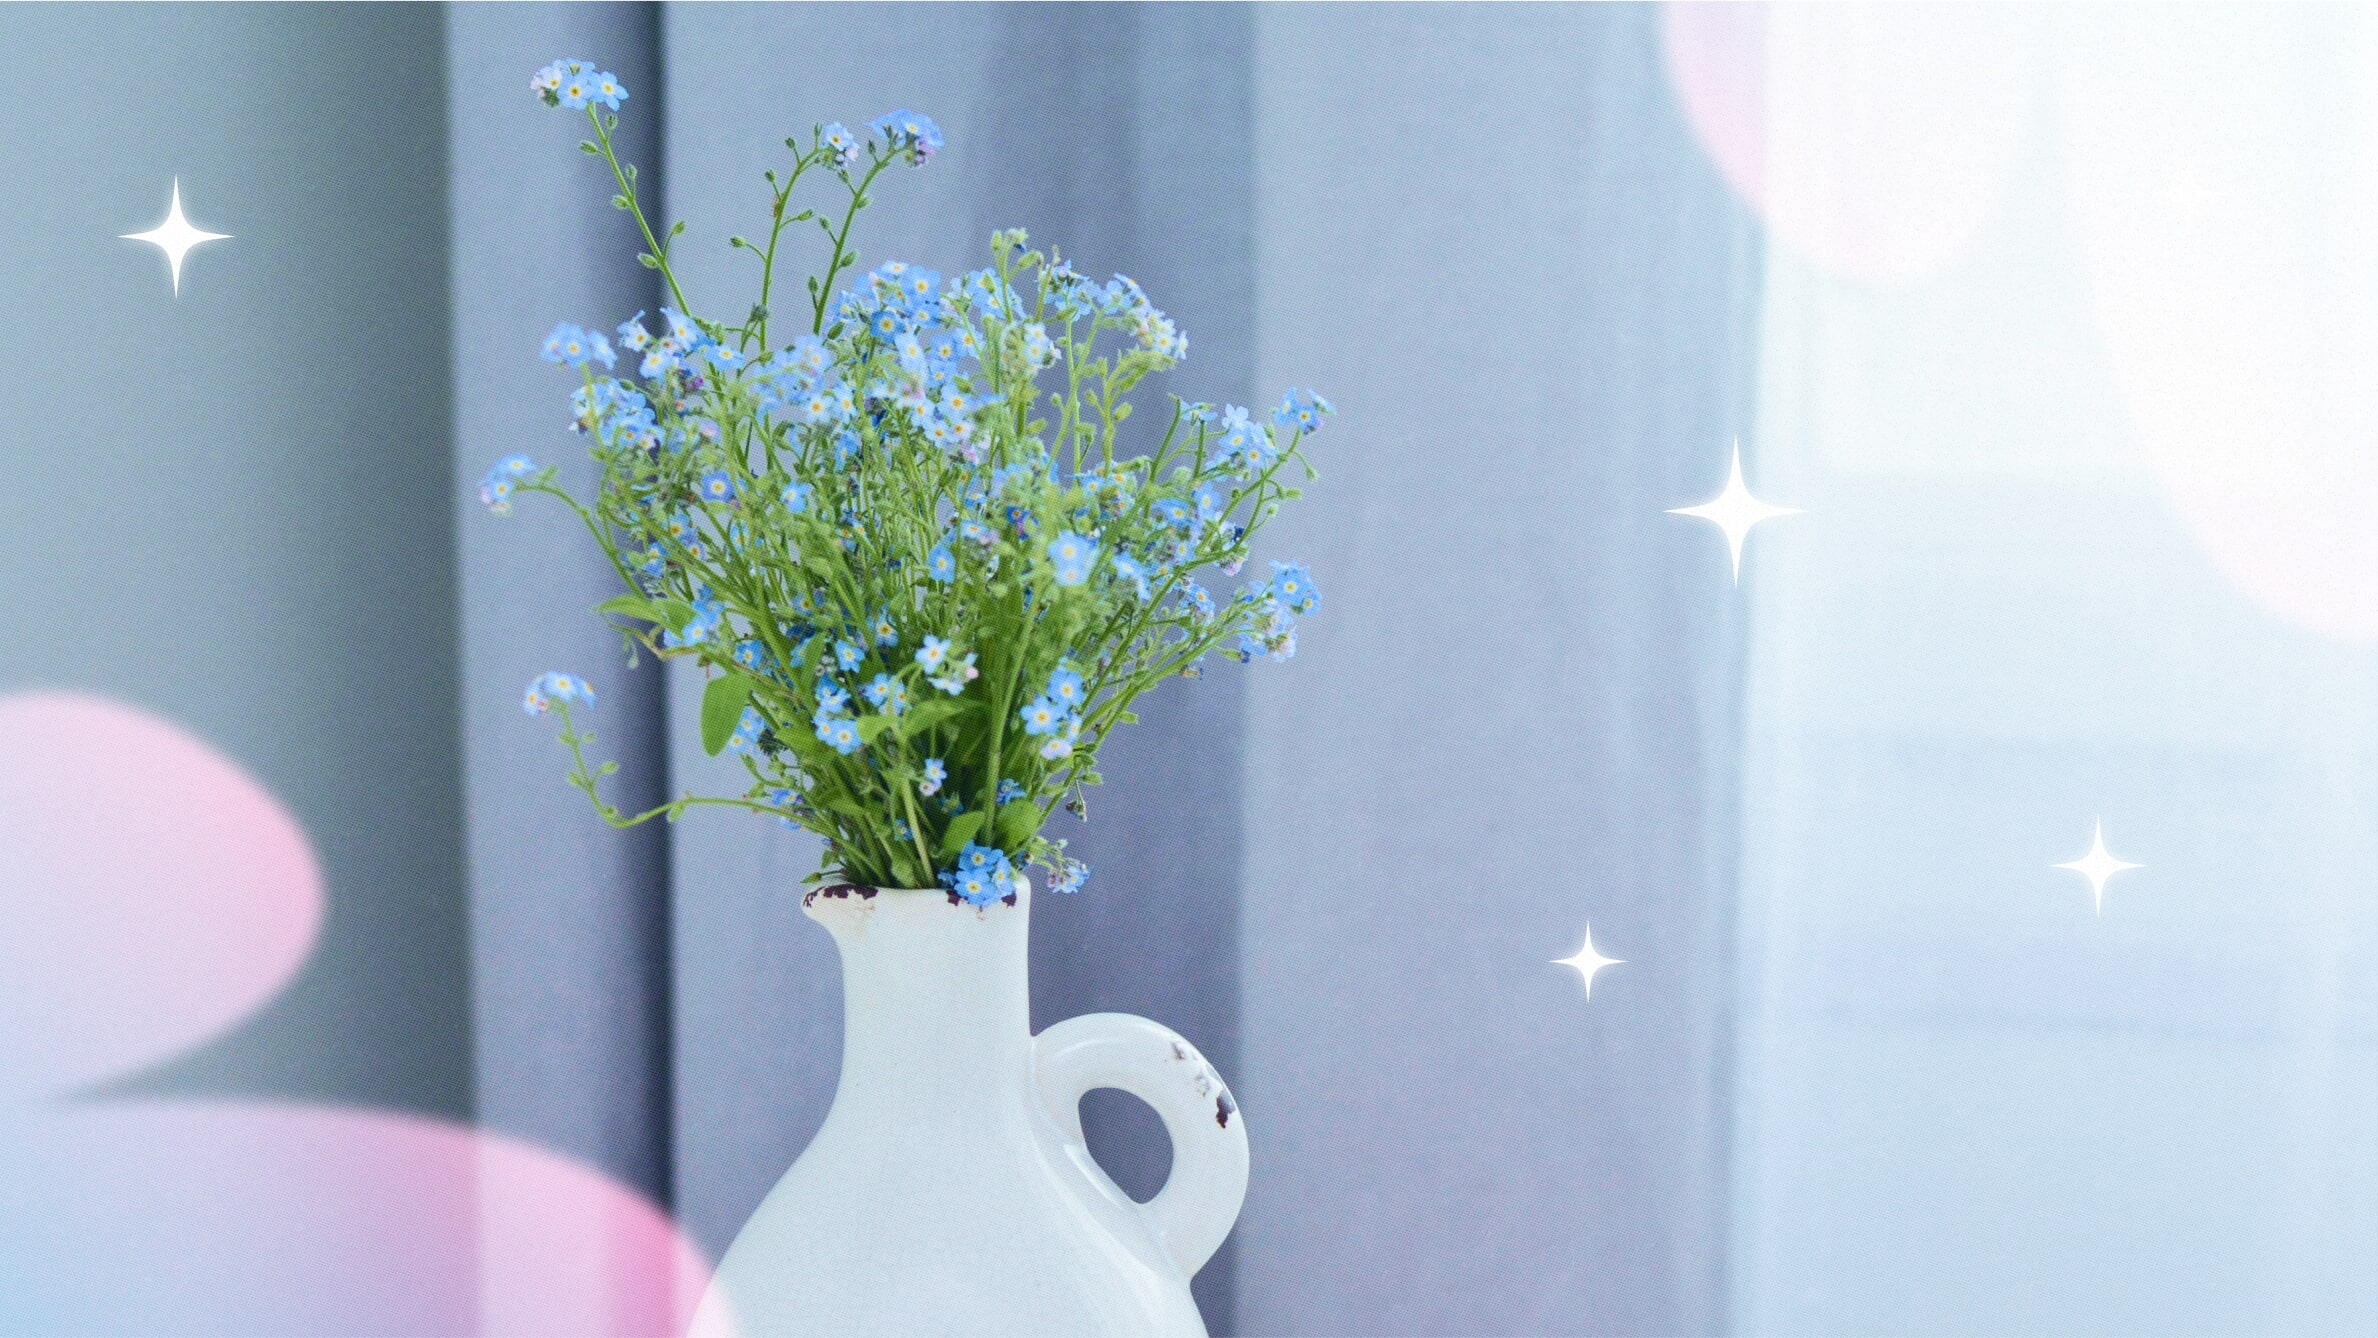 Forget-me-not flowers in a vase